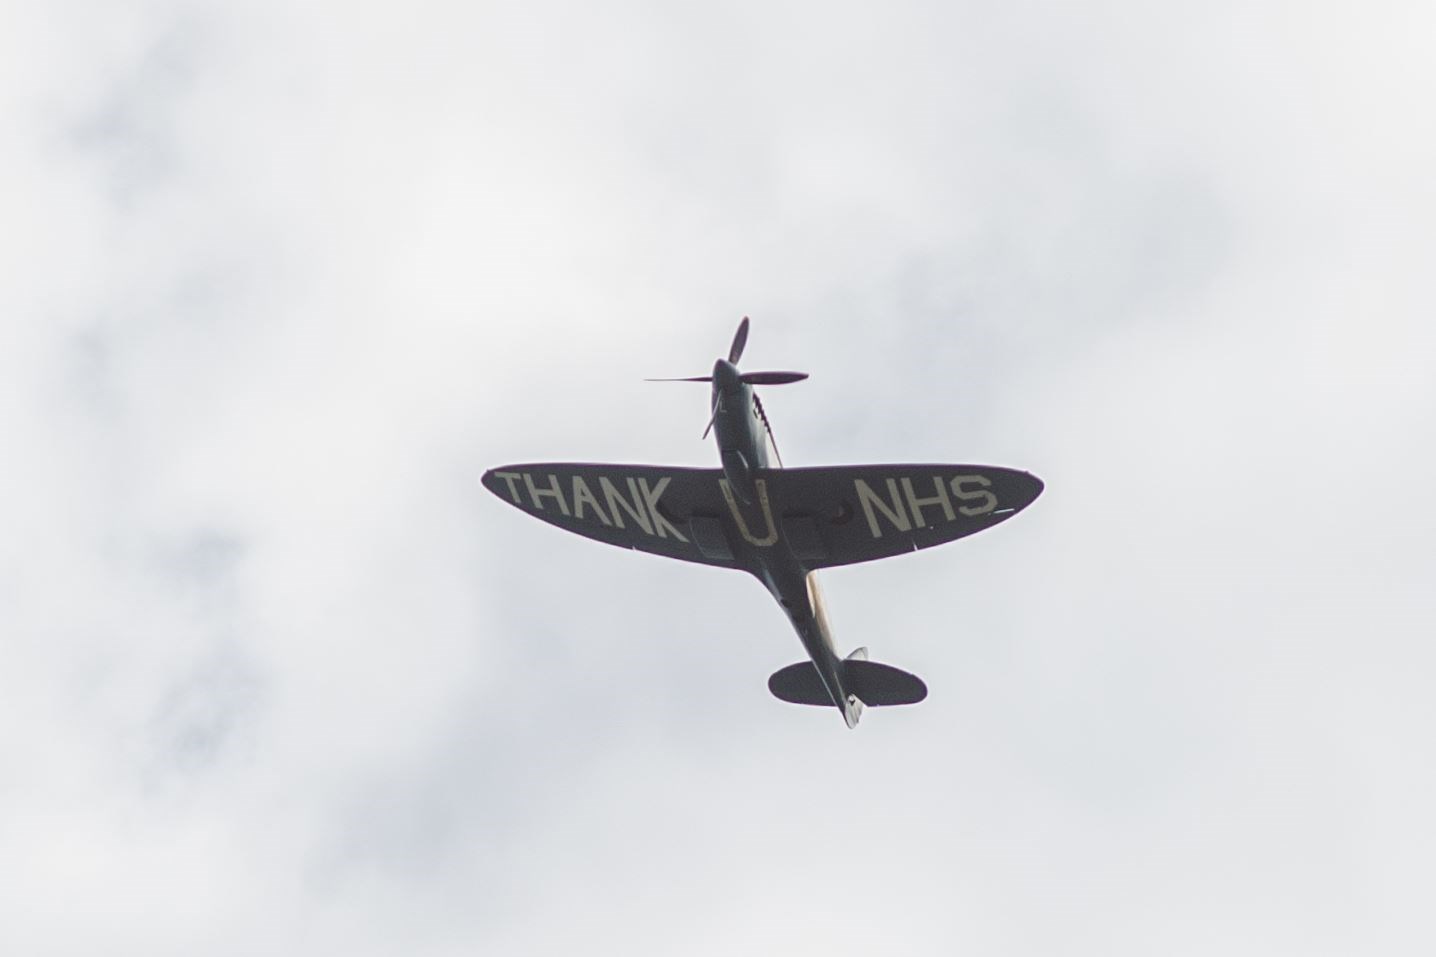 A Spitfire performed a flypast over Dr Gray's this morning as part of a nationwide tribute to the NHS. Picture: Daniel Forsyth.